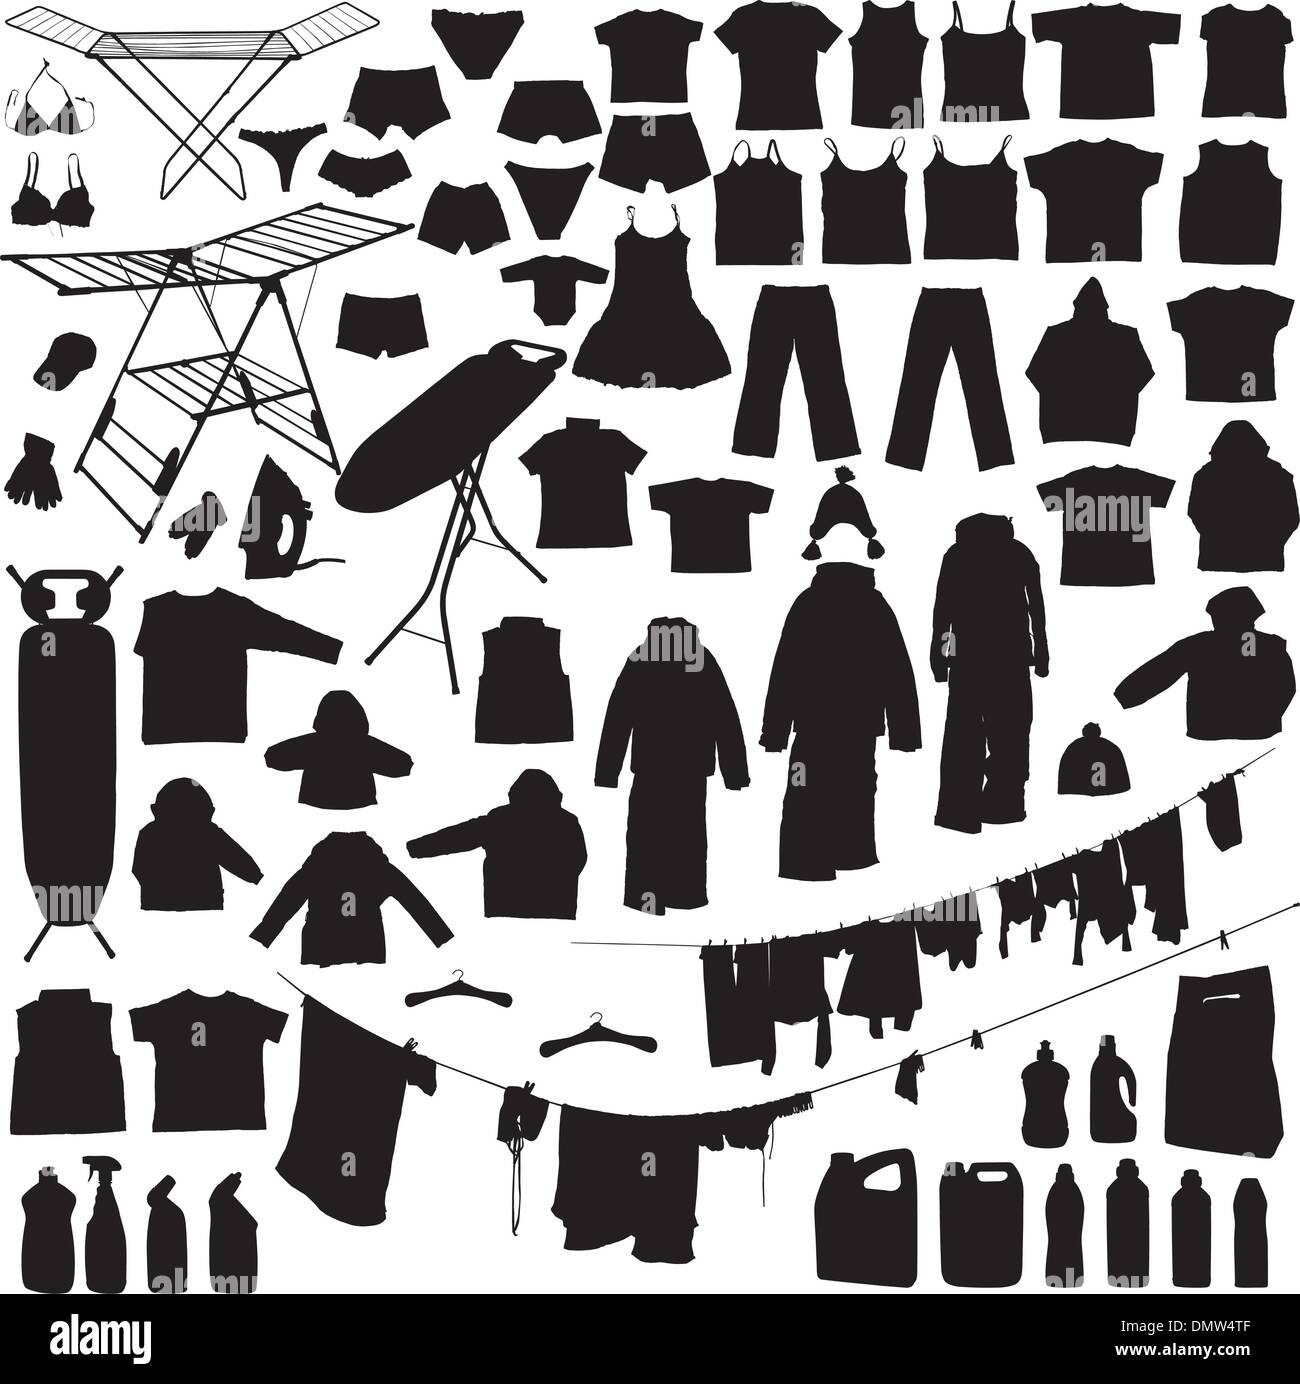 Laundry objects black and white silhouettes Stock Vector